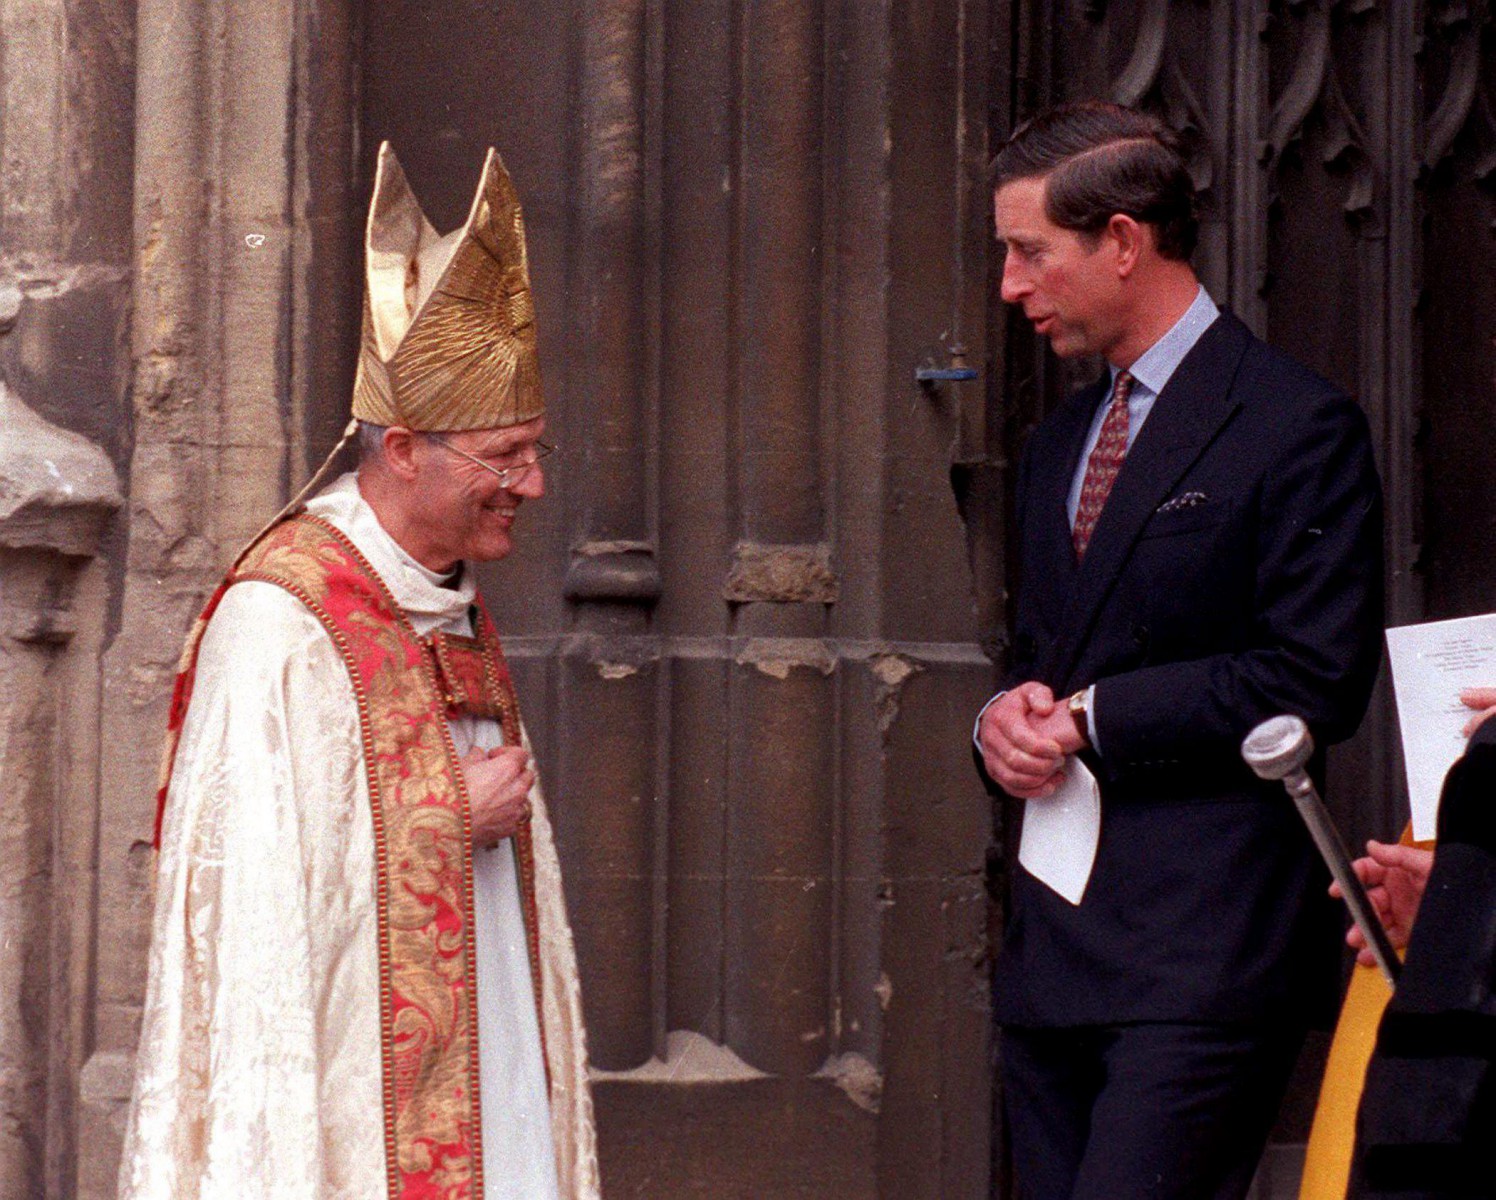 Prince Charles was friends with the former bishop